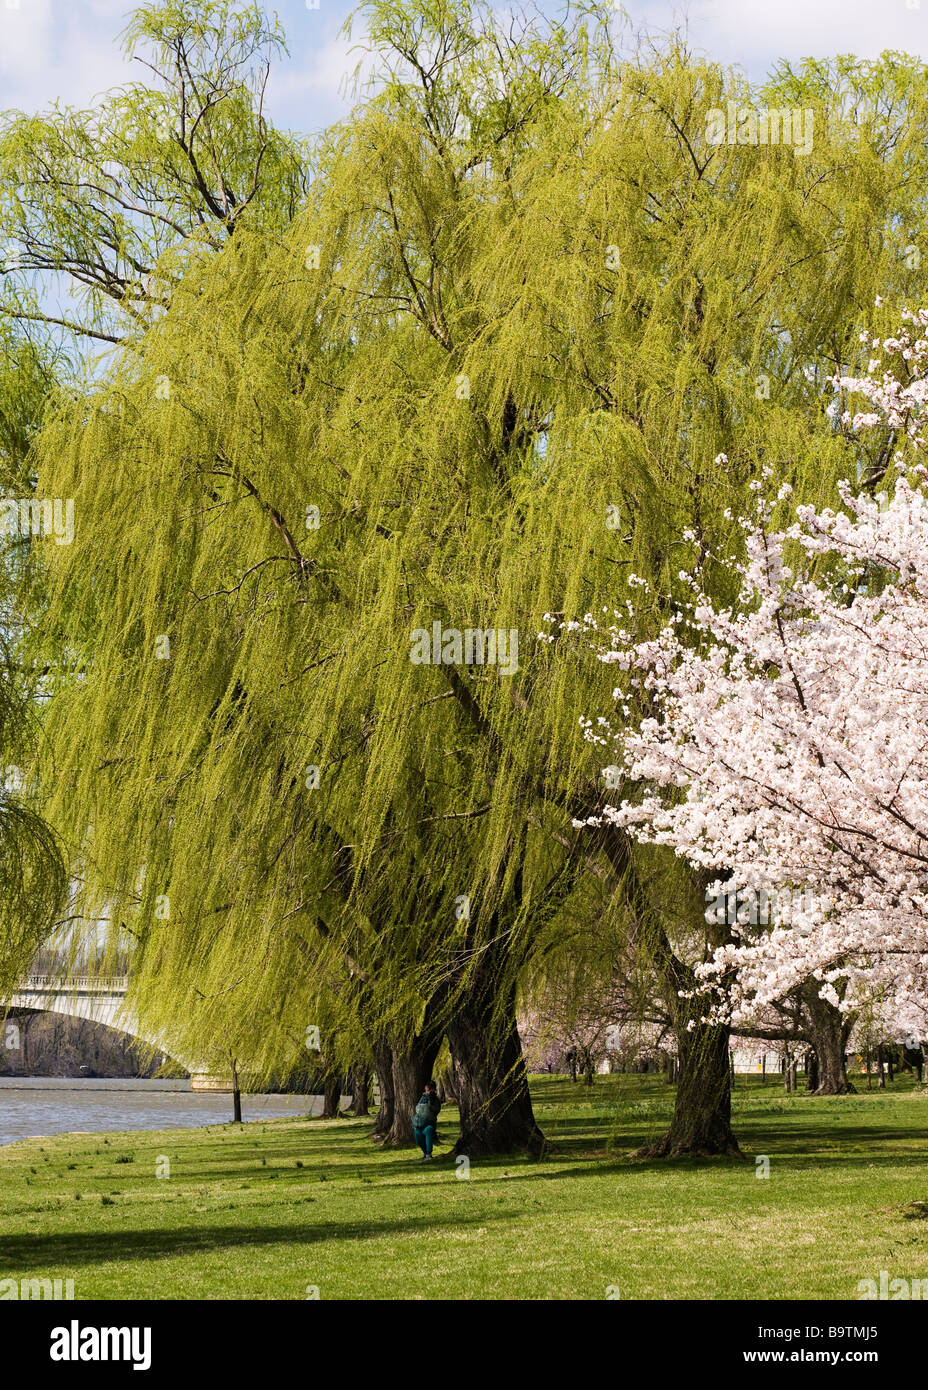 Willow tree in spring Stock Photo